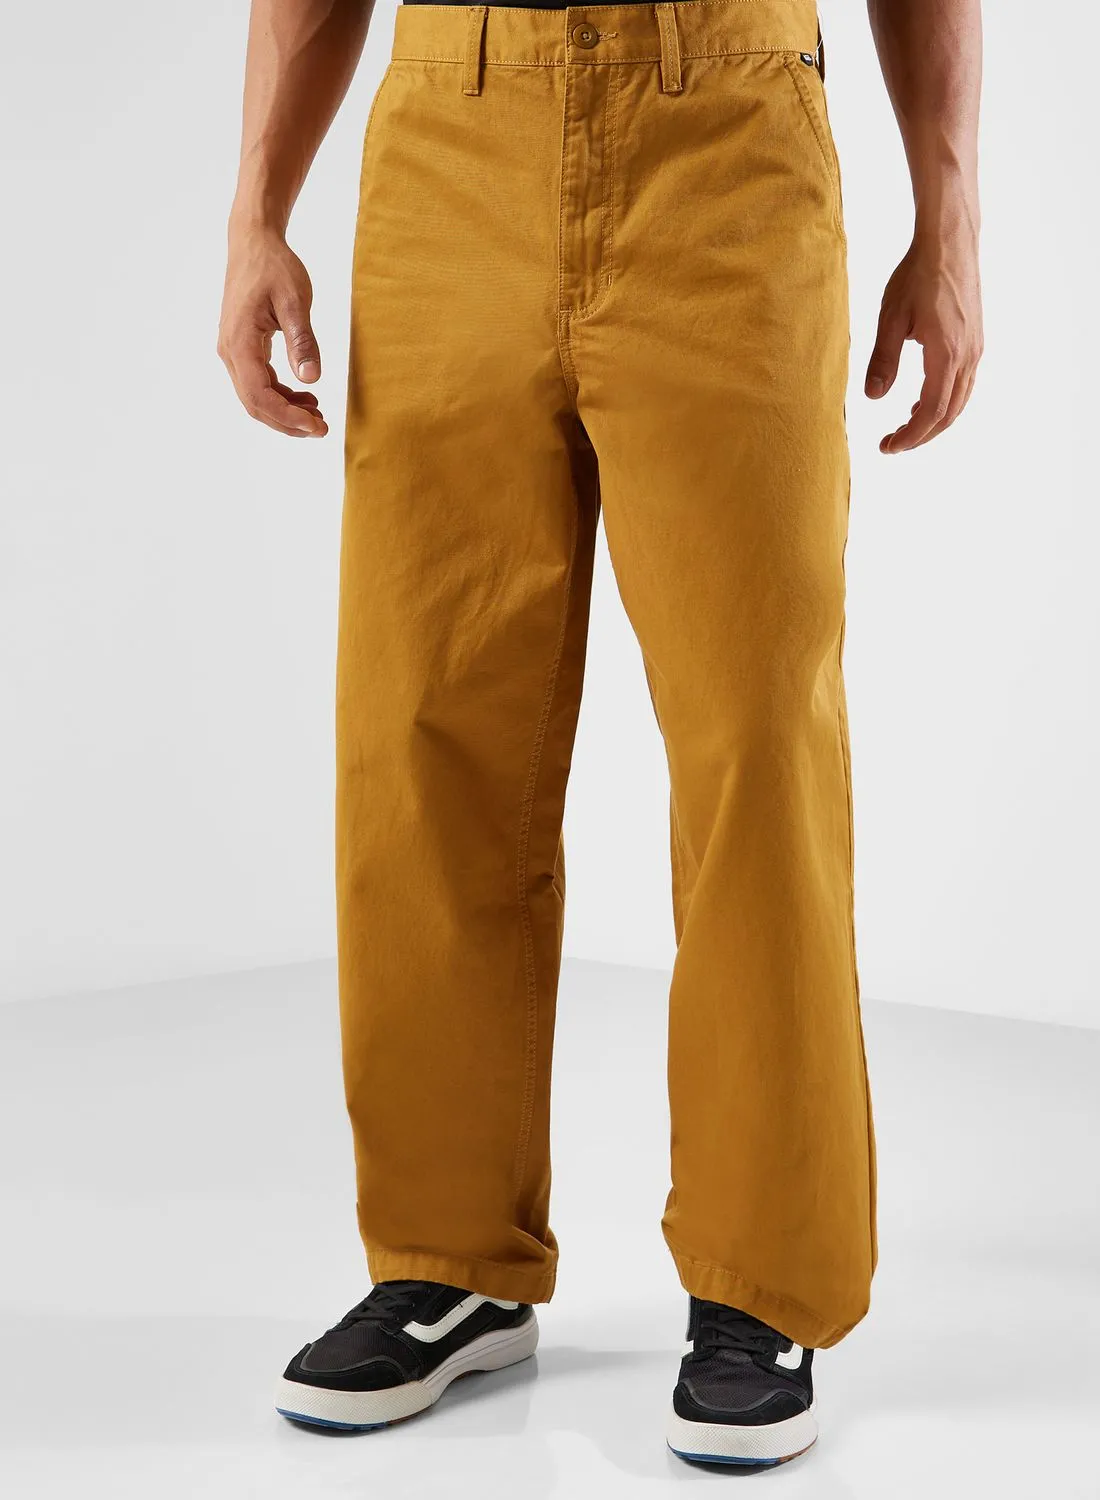 VANS Authentic Baggy Chinos